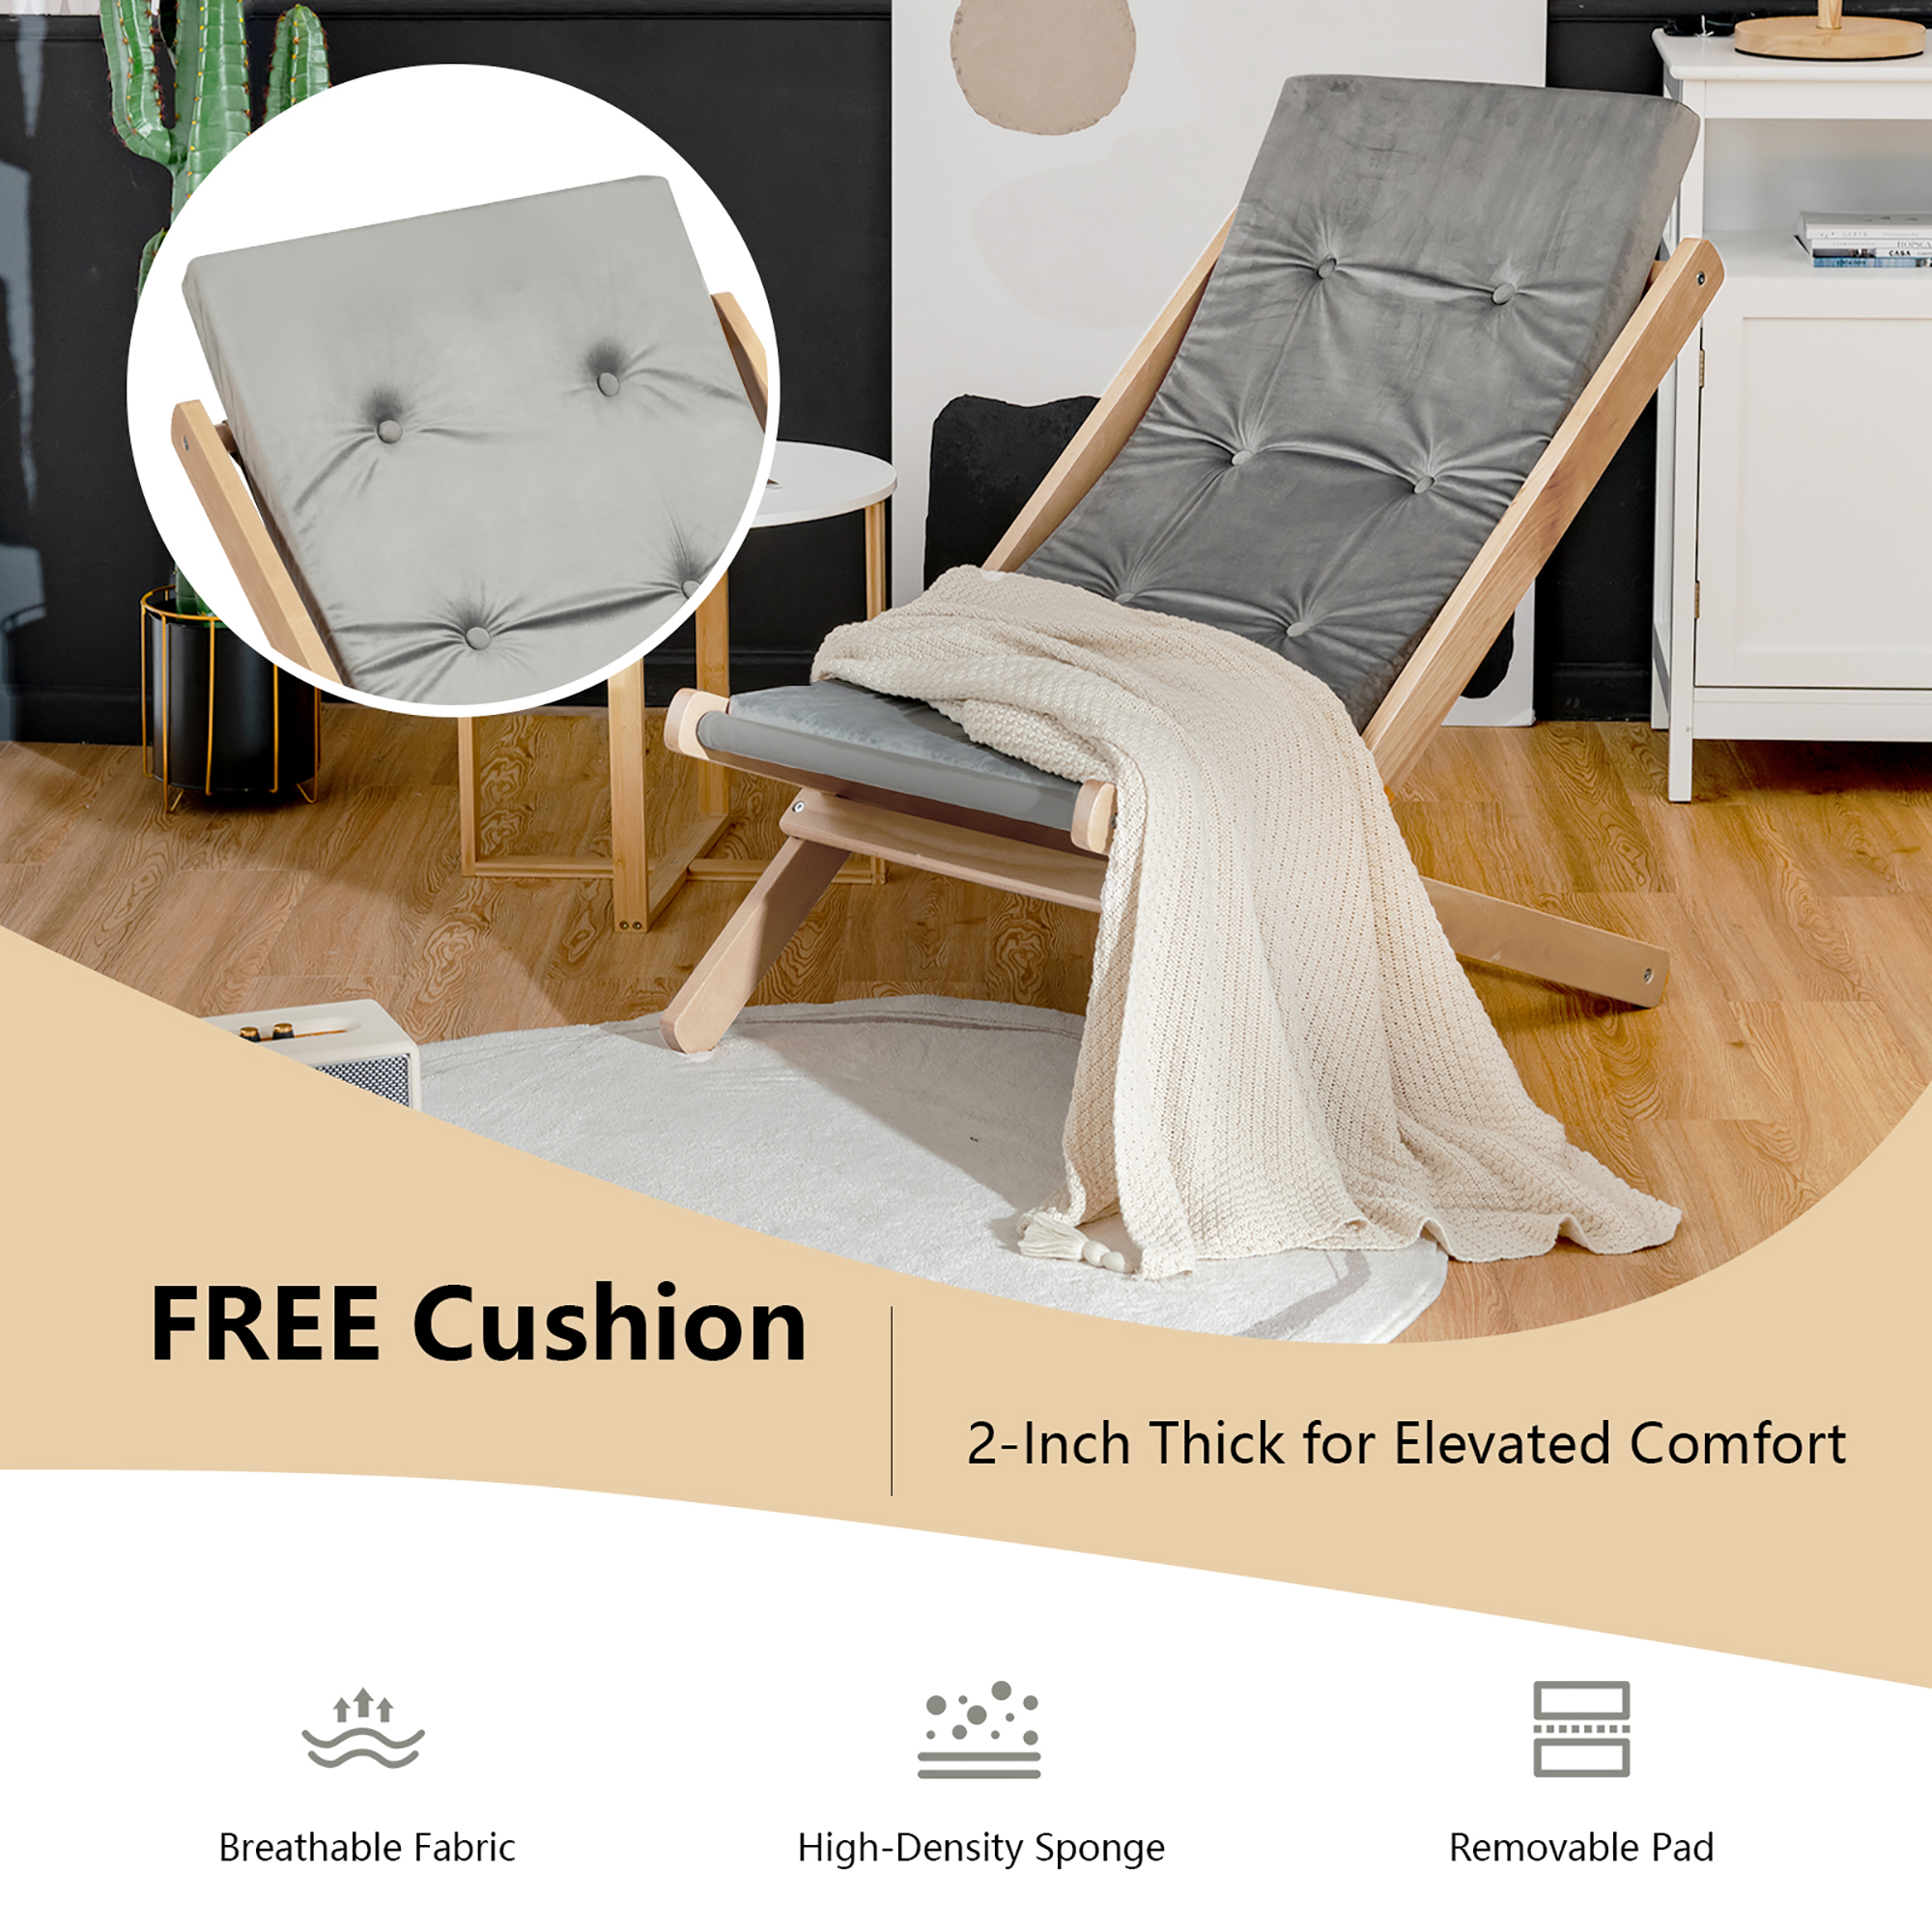 Costway Foldable Wood Beach Sling Chair 3-Position Adjustable Beech Chair w/Free Cushion - image 4 of 9